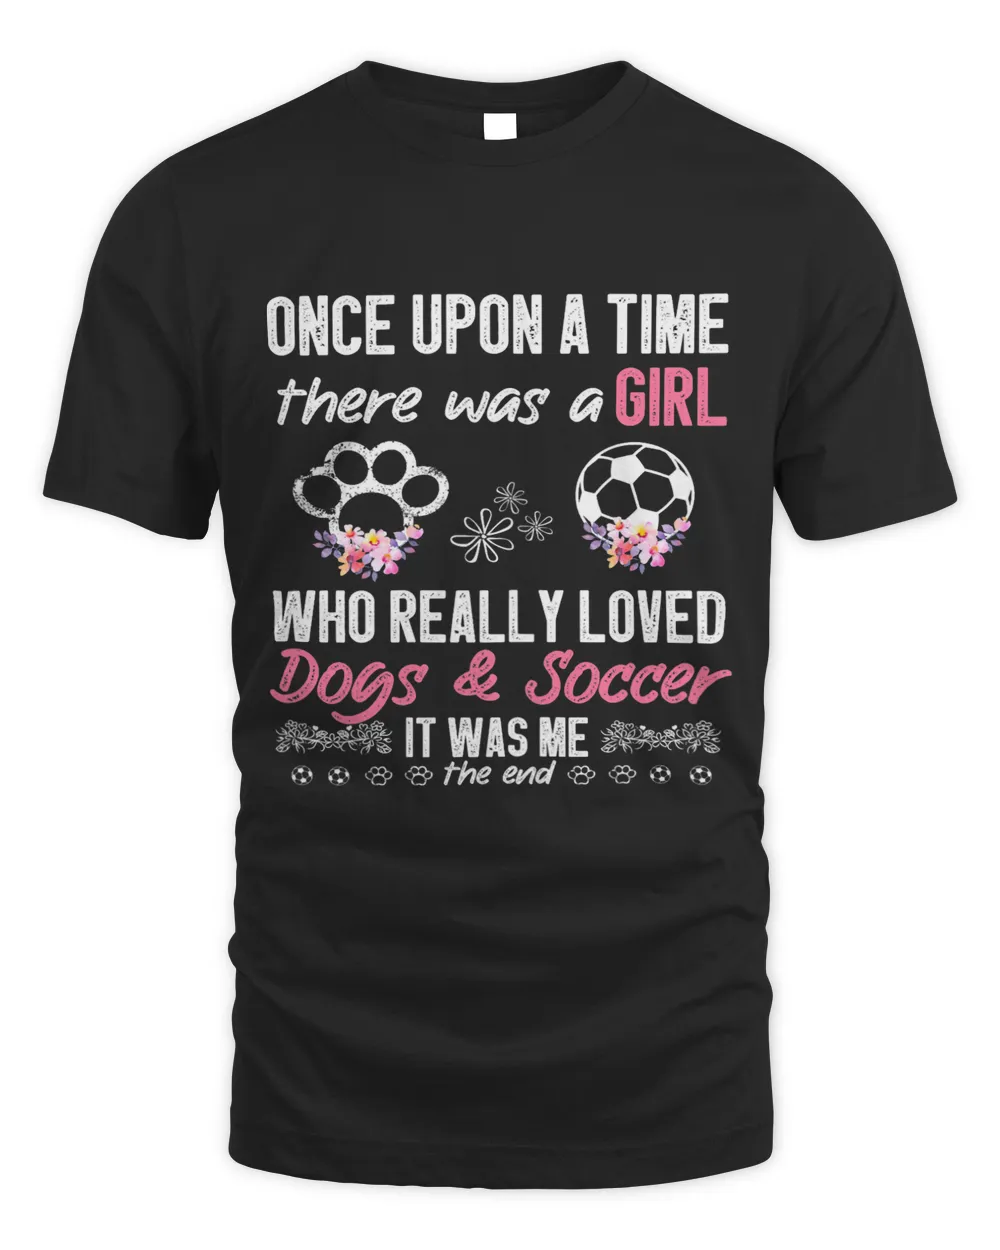 Once Upon A Time There Was A Girl Loved Dogs and Soccer